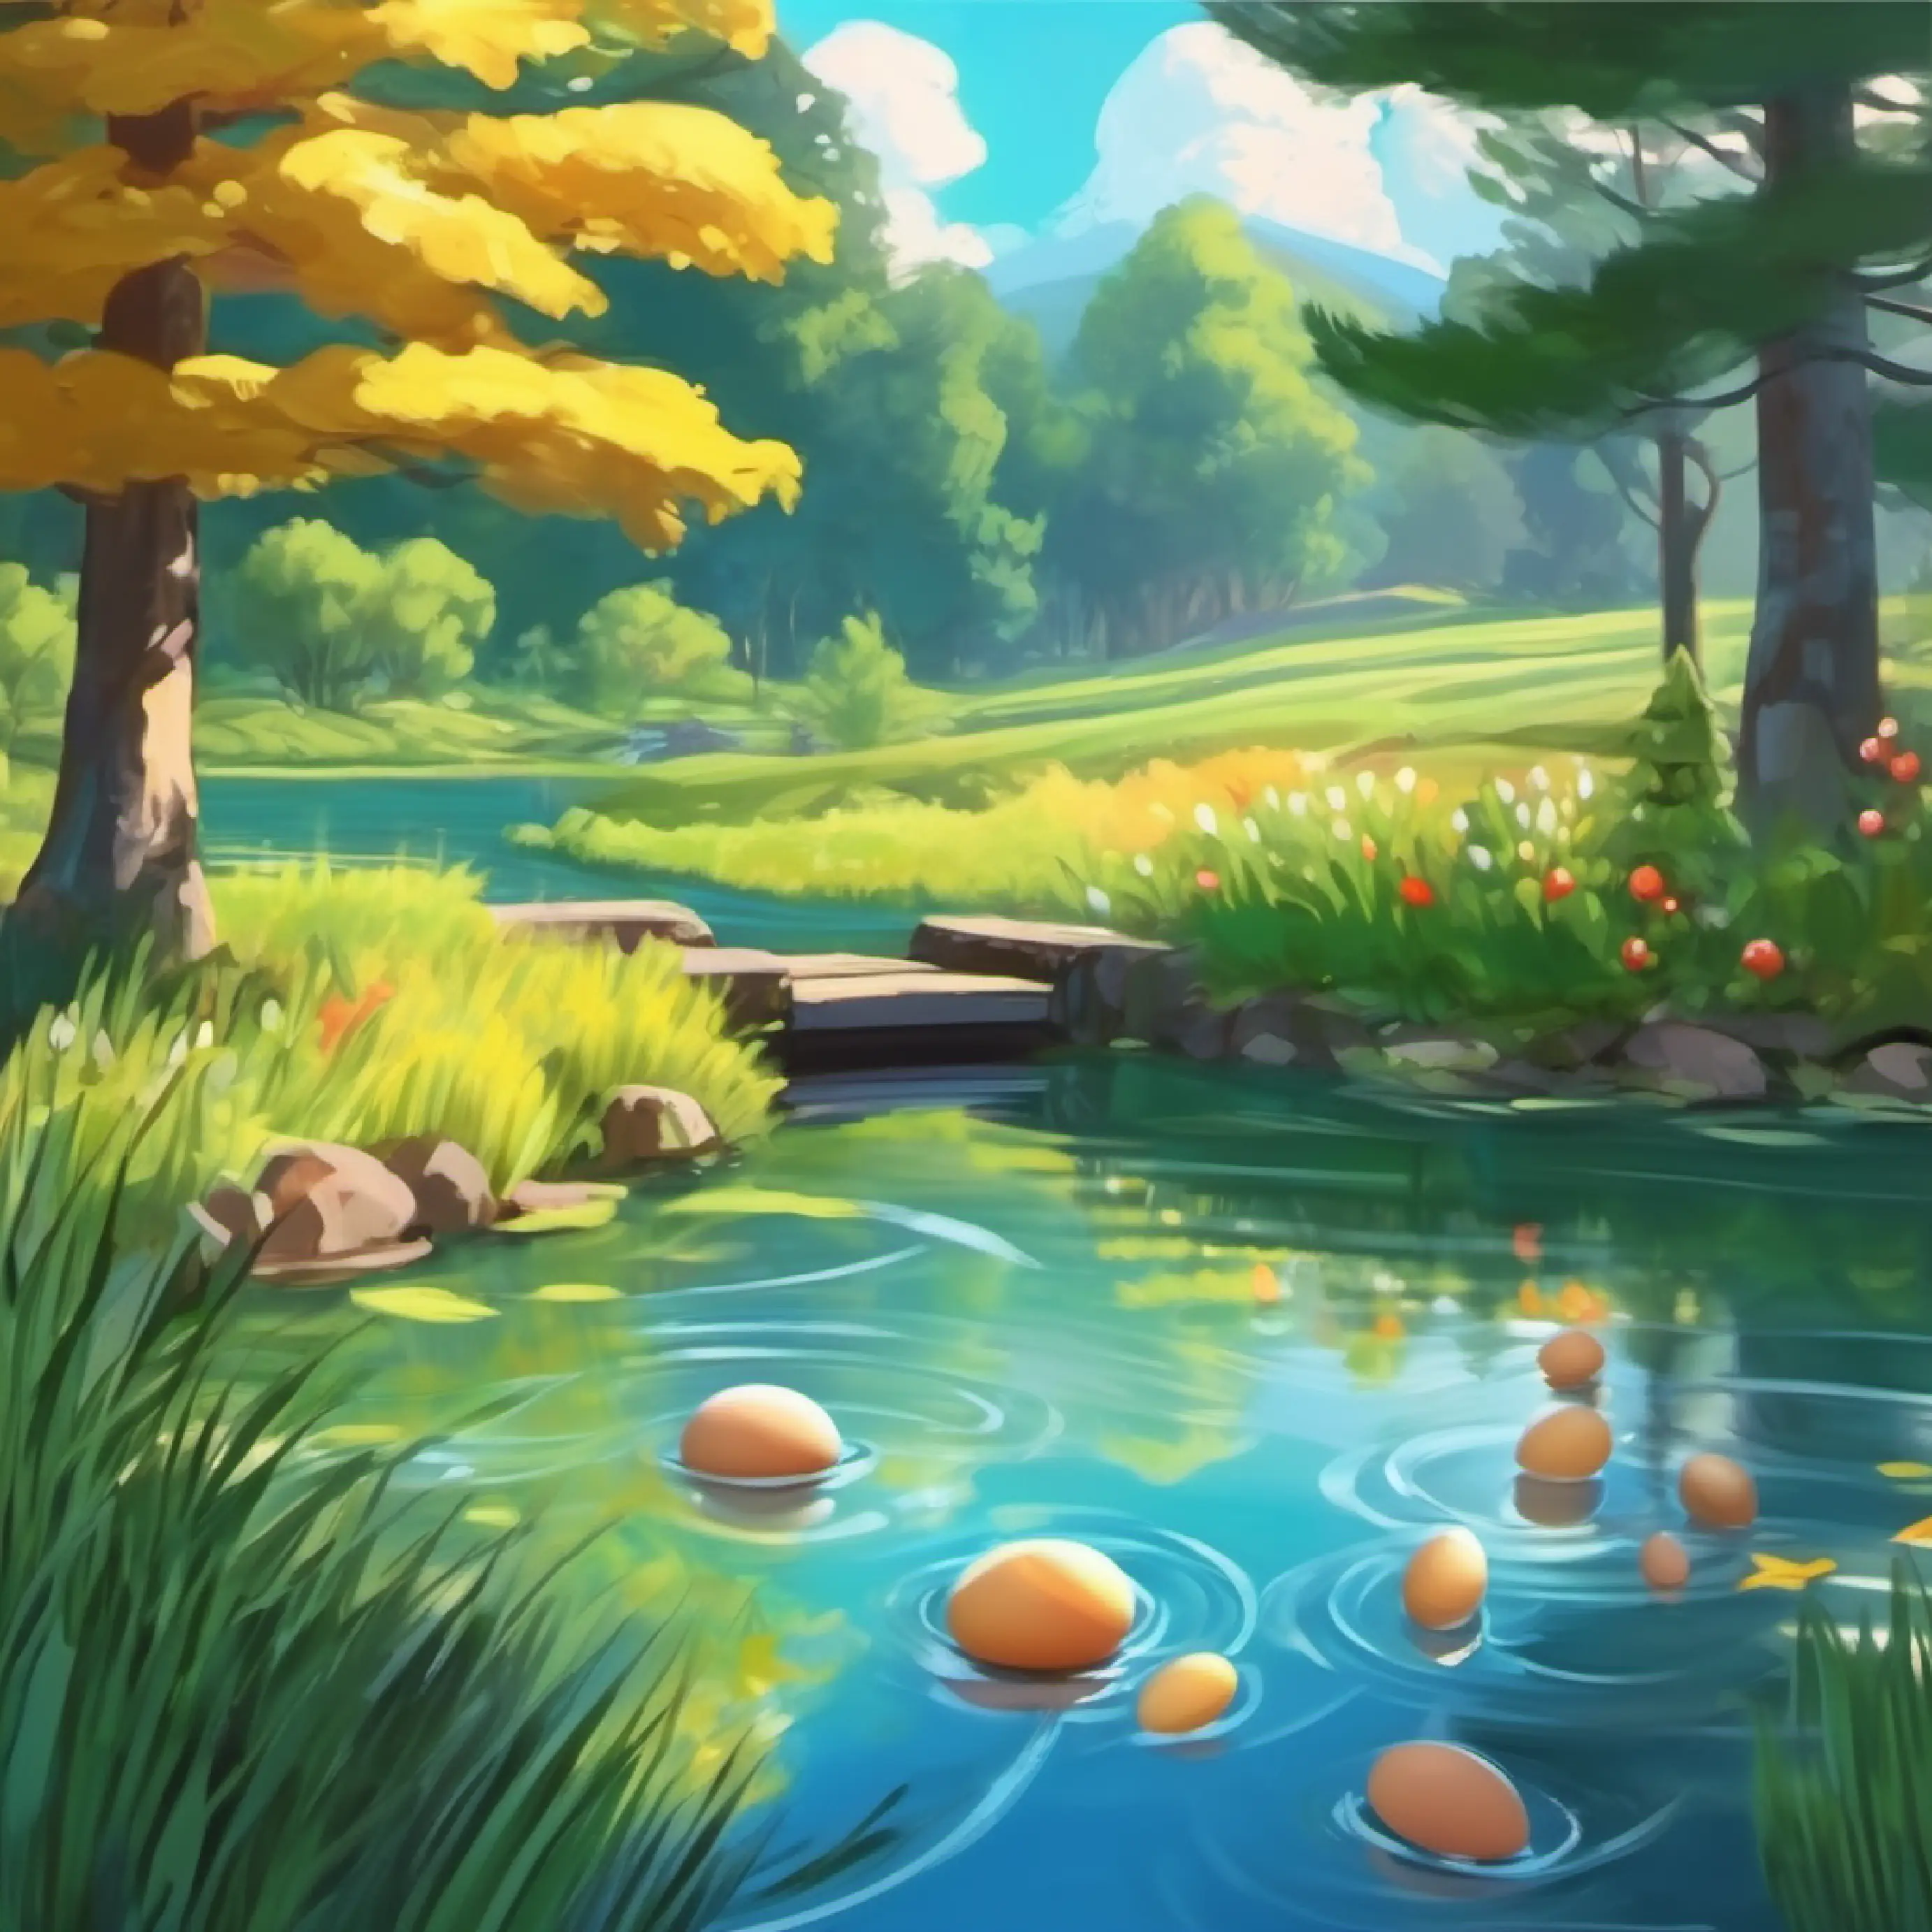 Setting introduction, egg in the pond, tranquil environment.